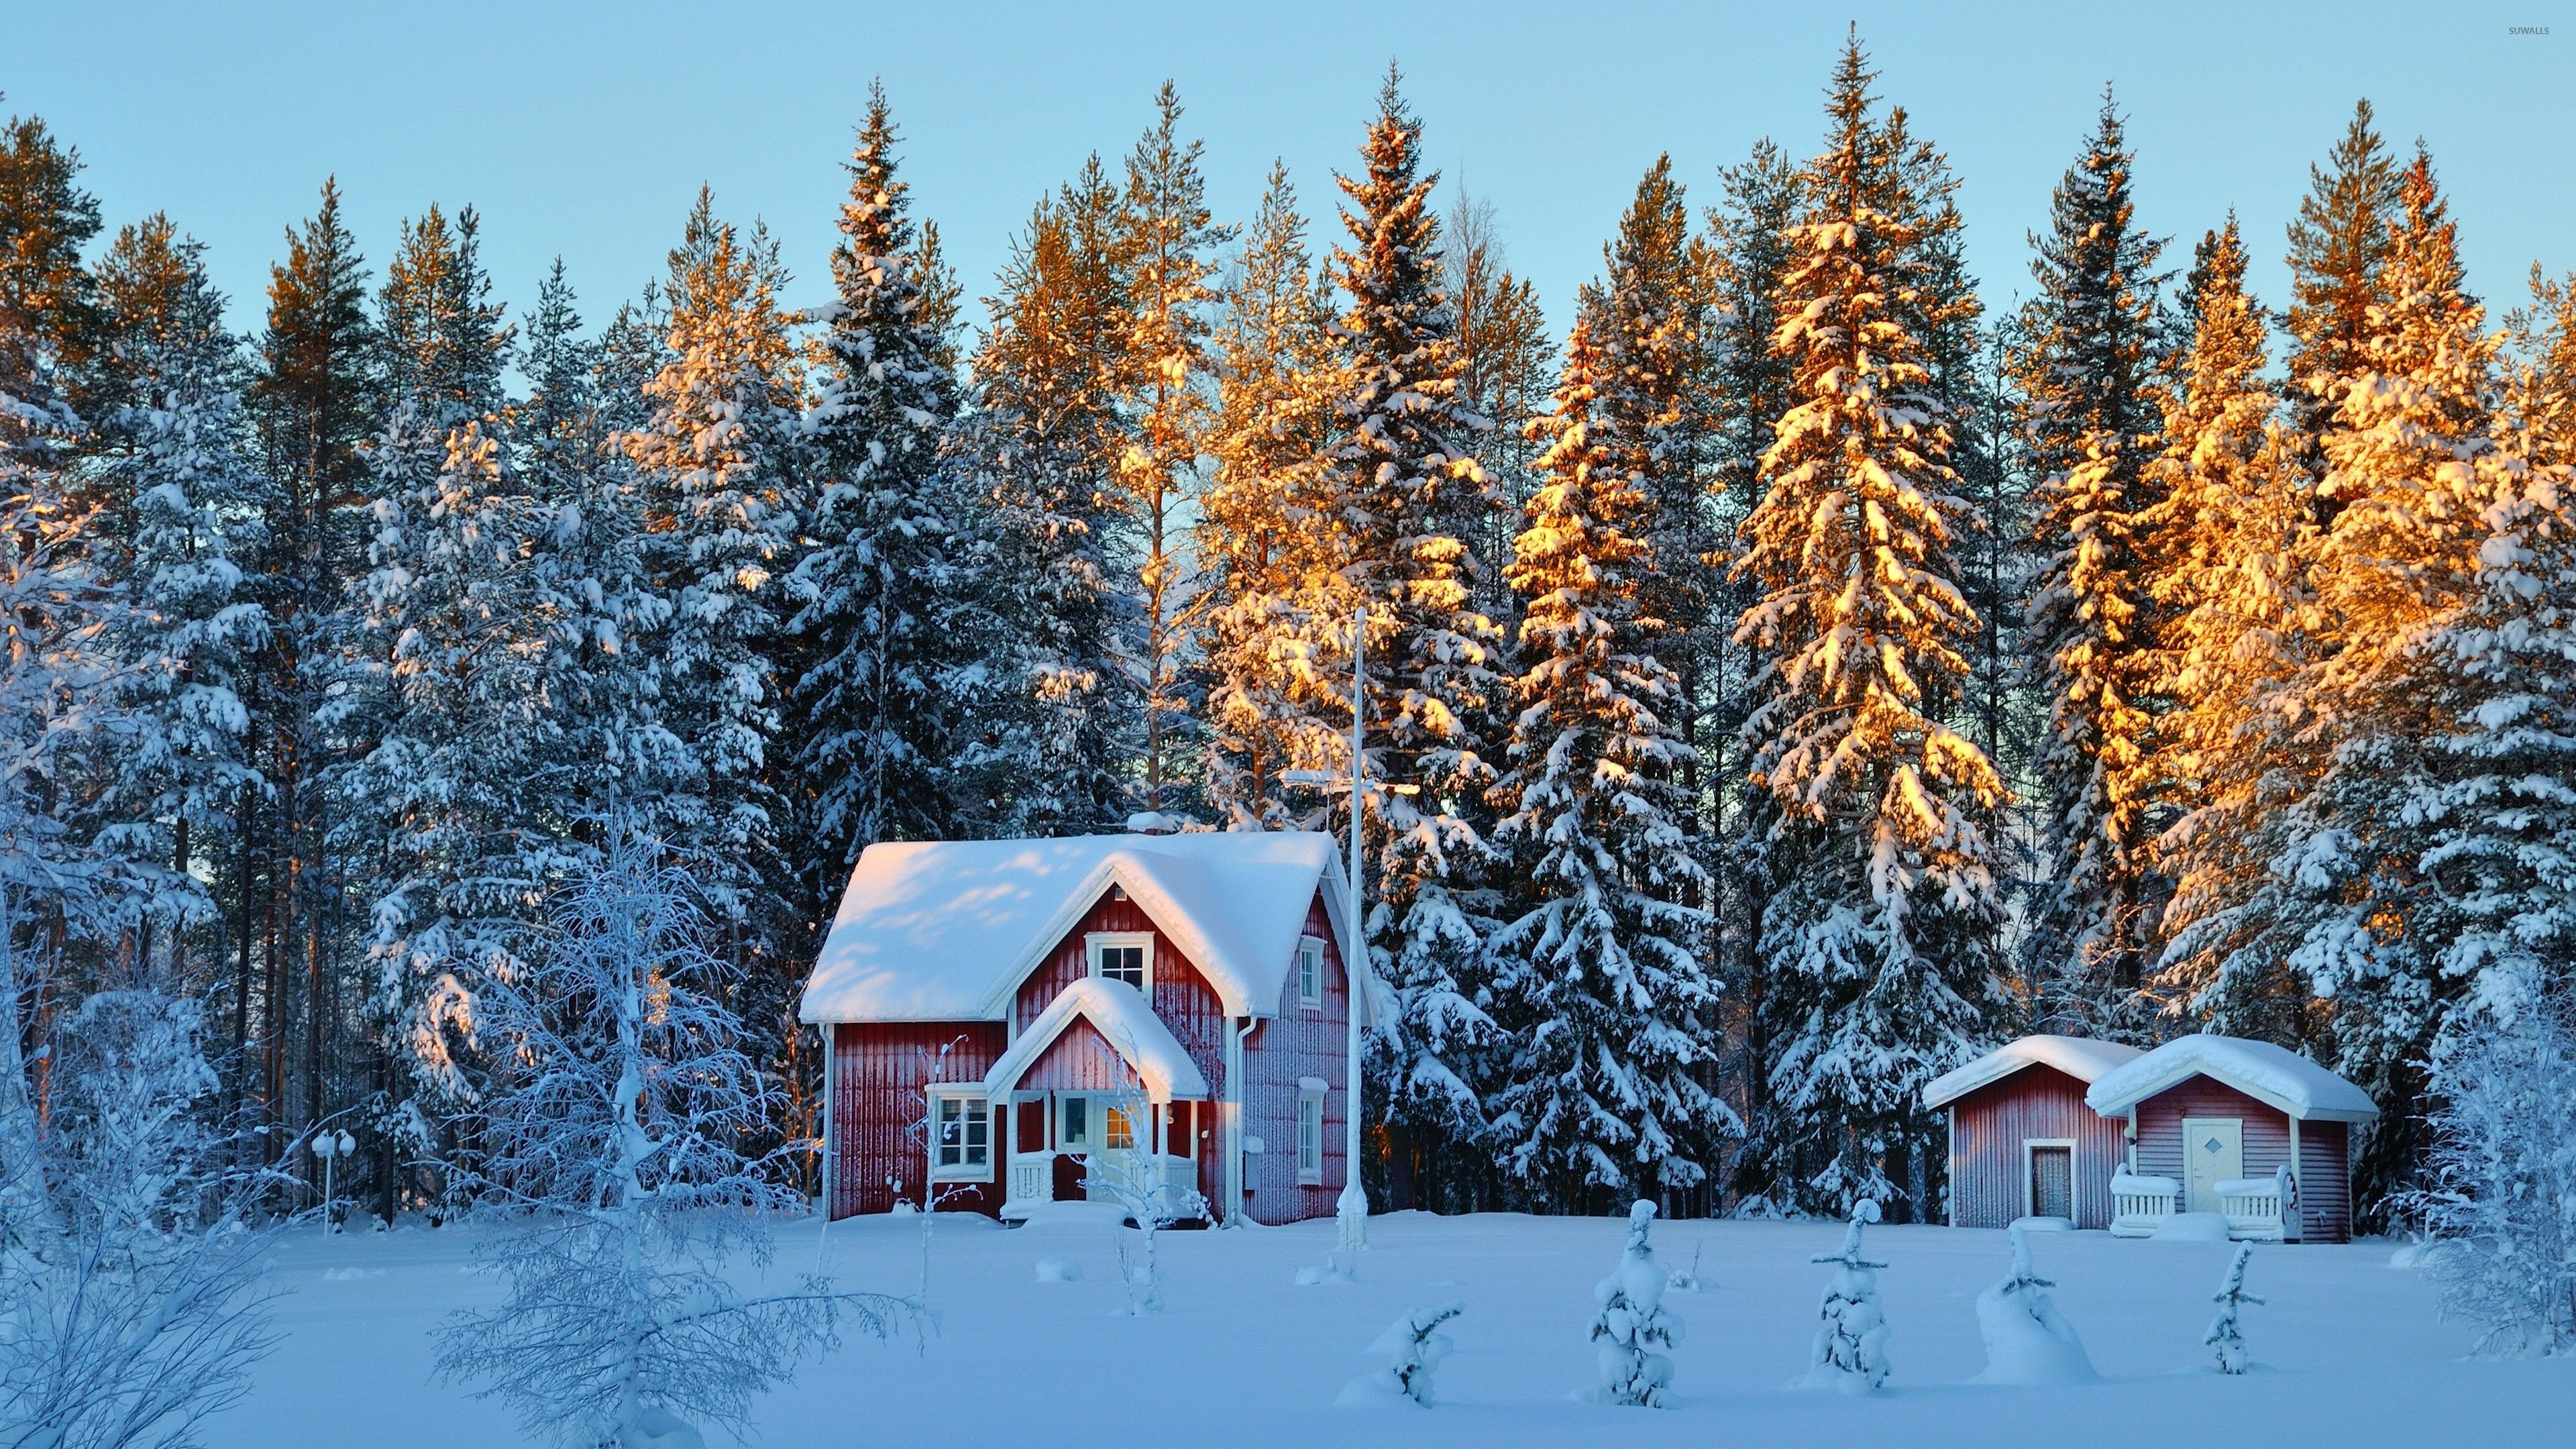 Small houses in the snowy forest wallpaper   Nature wallpapers 3840x2160